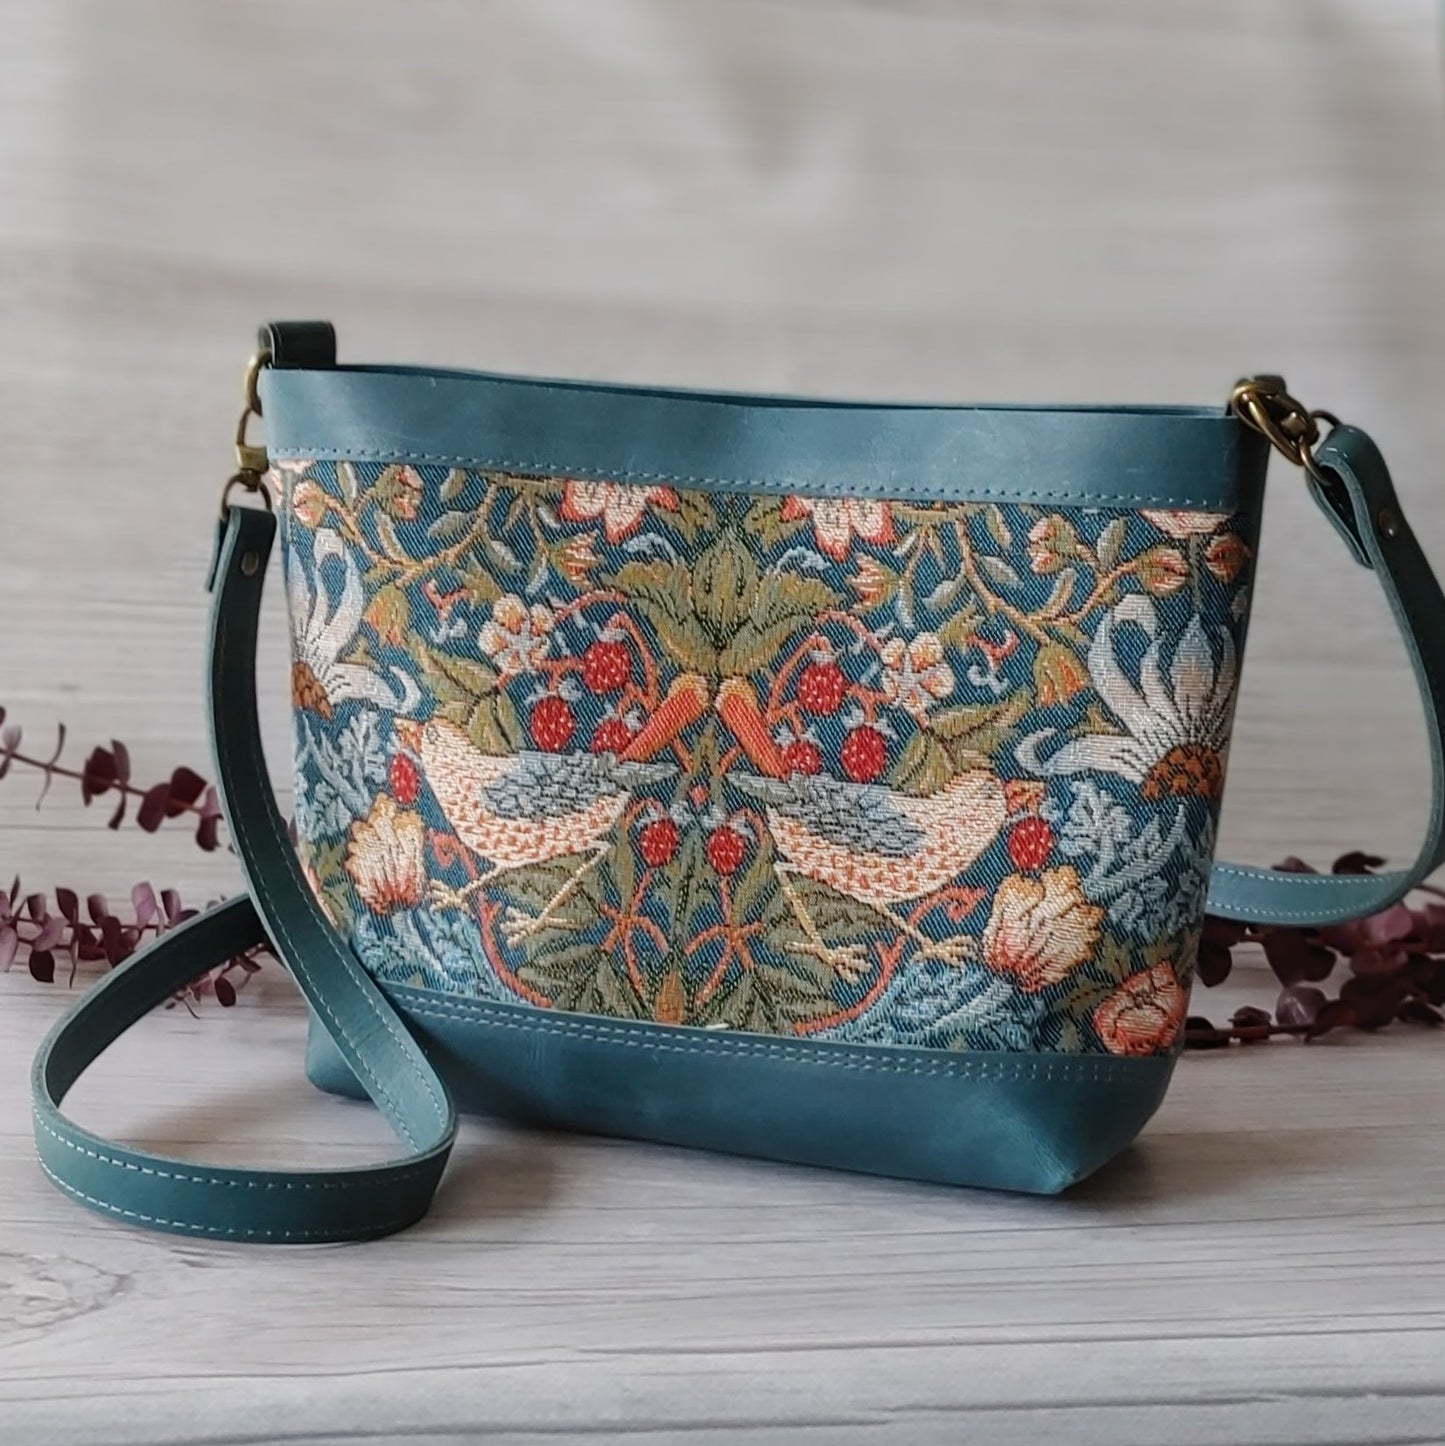 Handbag in leather with panel of Strawberry Thief by William Morris tapestry. Made in Canada by Plumage Studio Accessories